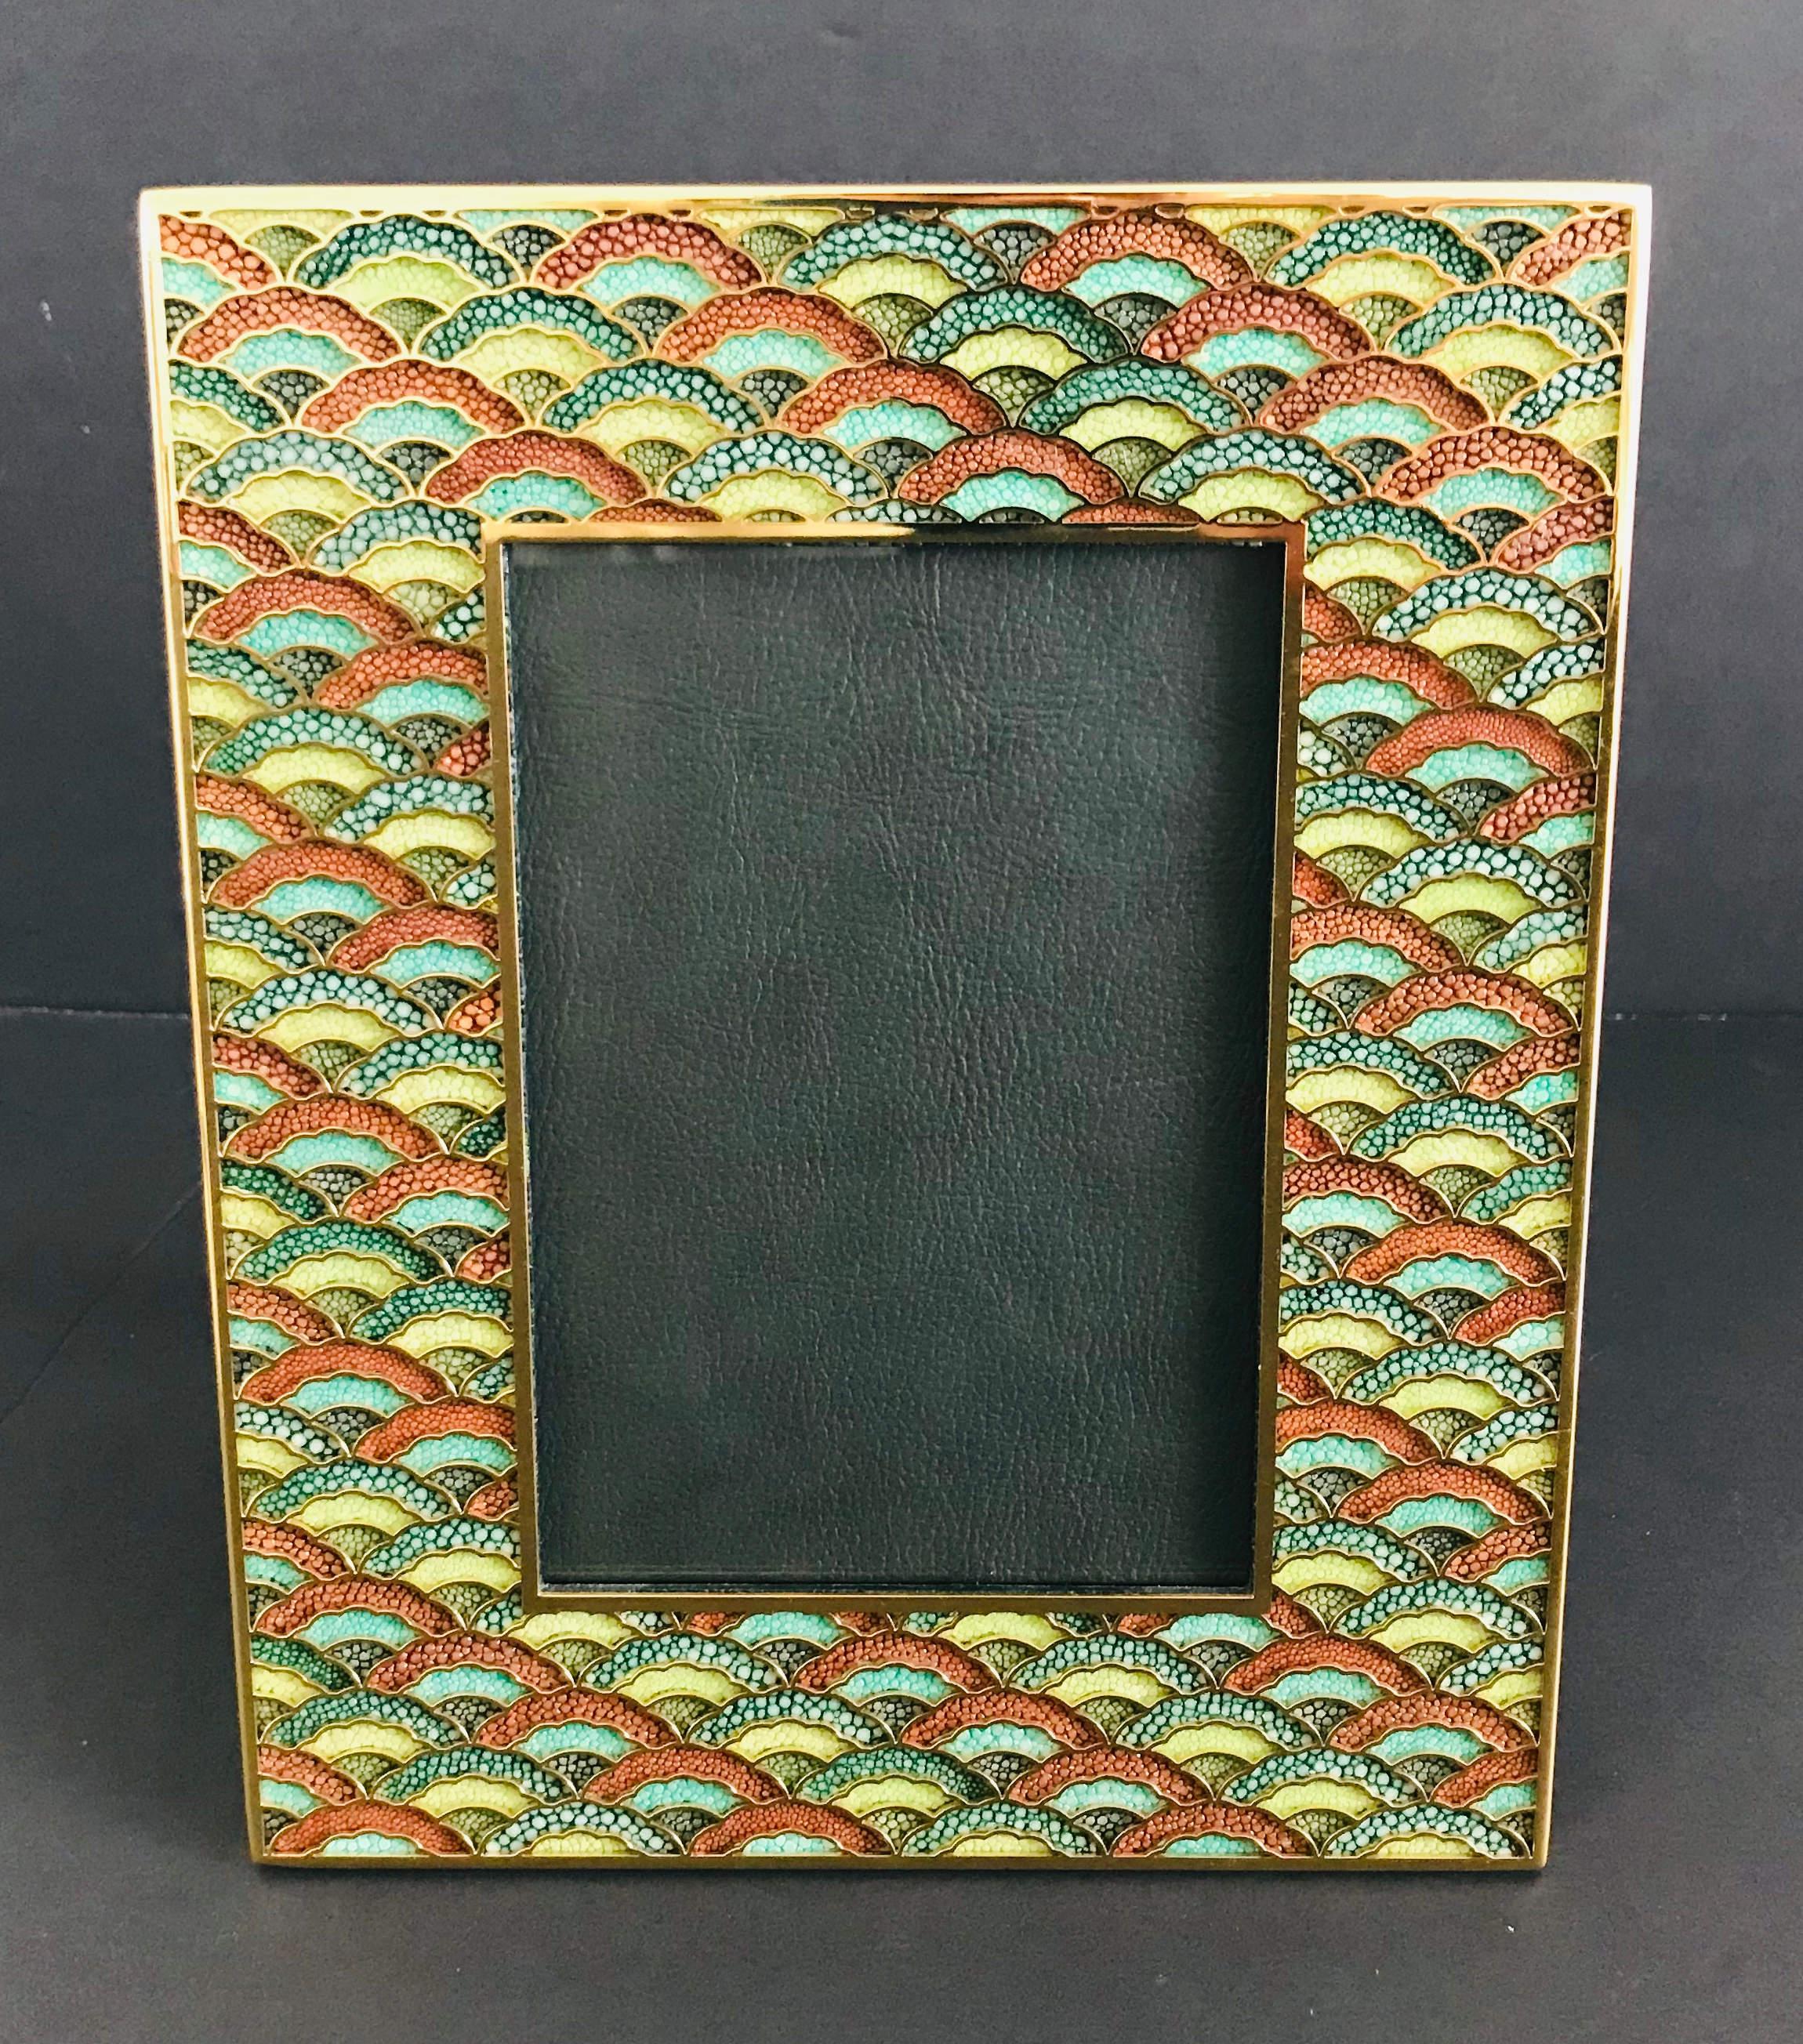 Multi-color shagreen leather and 24 karat gold-plated photo frame by Fabio Ltd
Height: 10.5 inches / Width: 8.5 inches / Depth: 1 inch
Photo size: 5 inches by 7 inches
LAST 1 in stock in Los Angeles
Order Reference #: FABIOLTD PF21
This piece makes